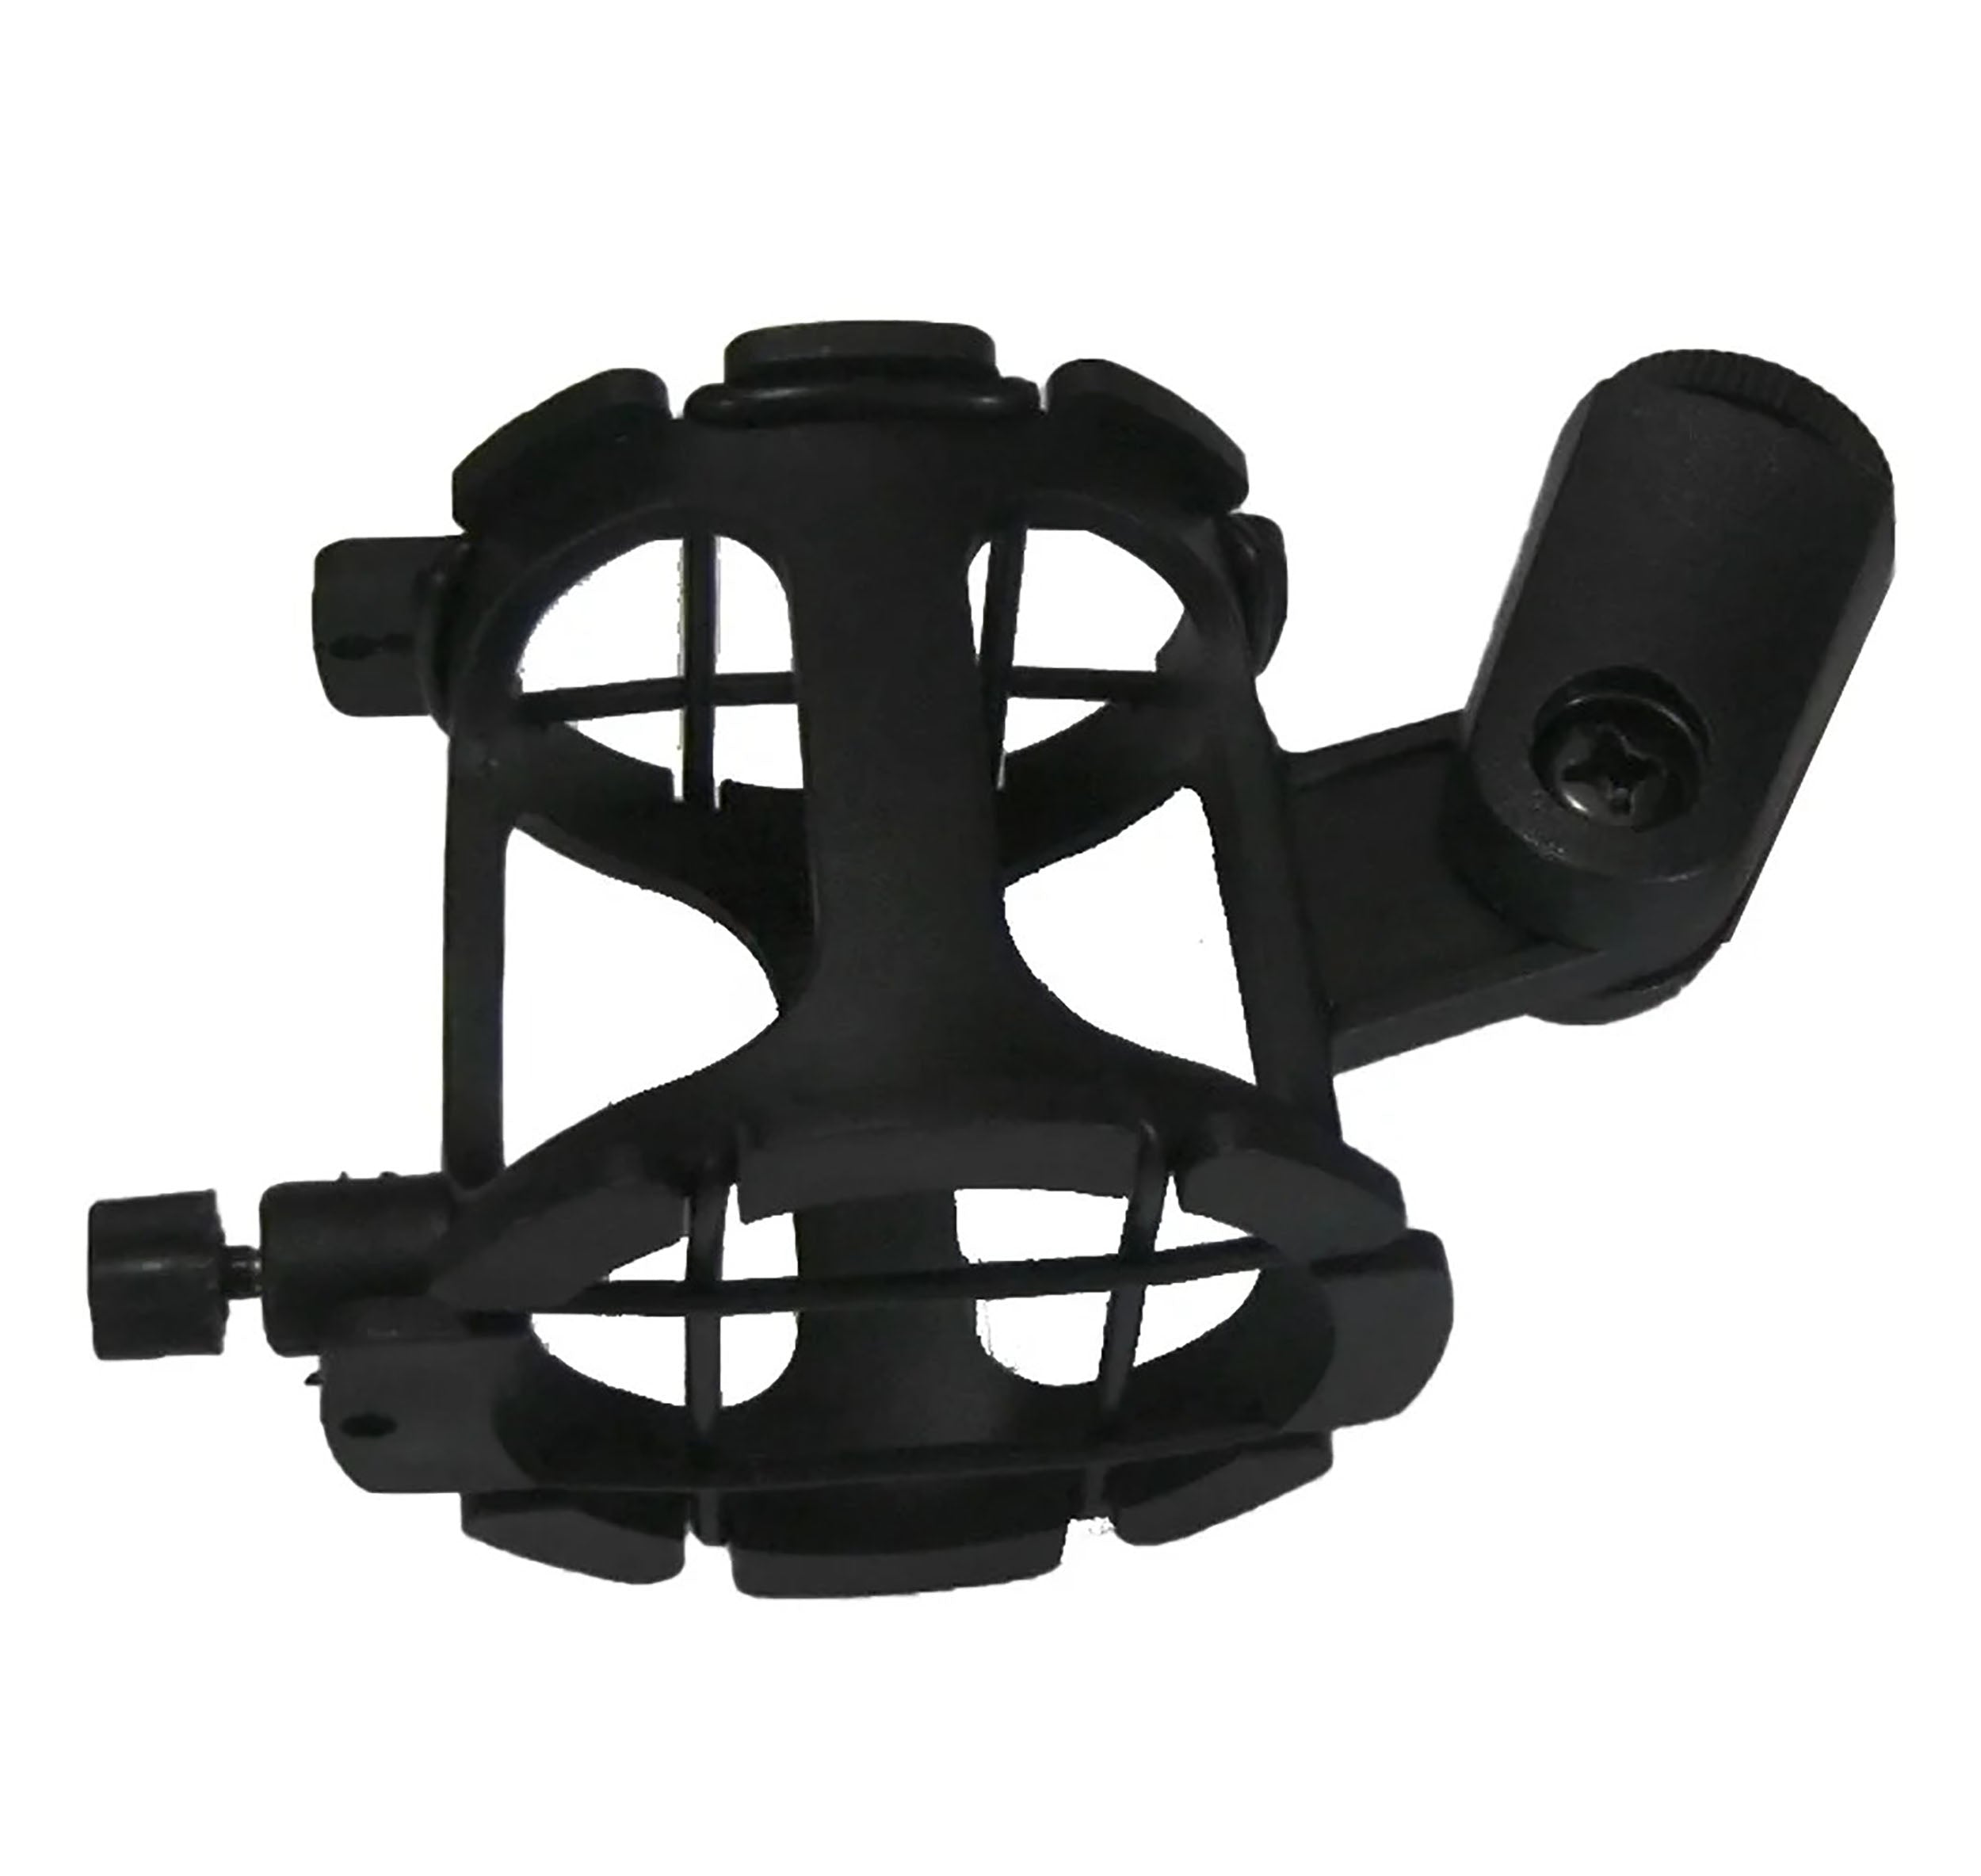 Technical Pro MKS1 Shock Mount Microphone Holder by Technical Pro